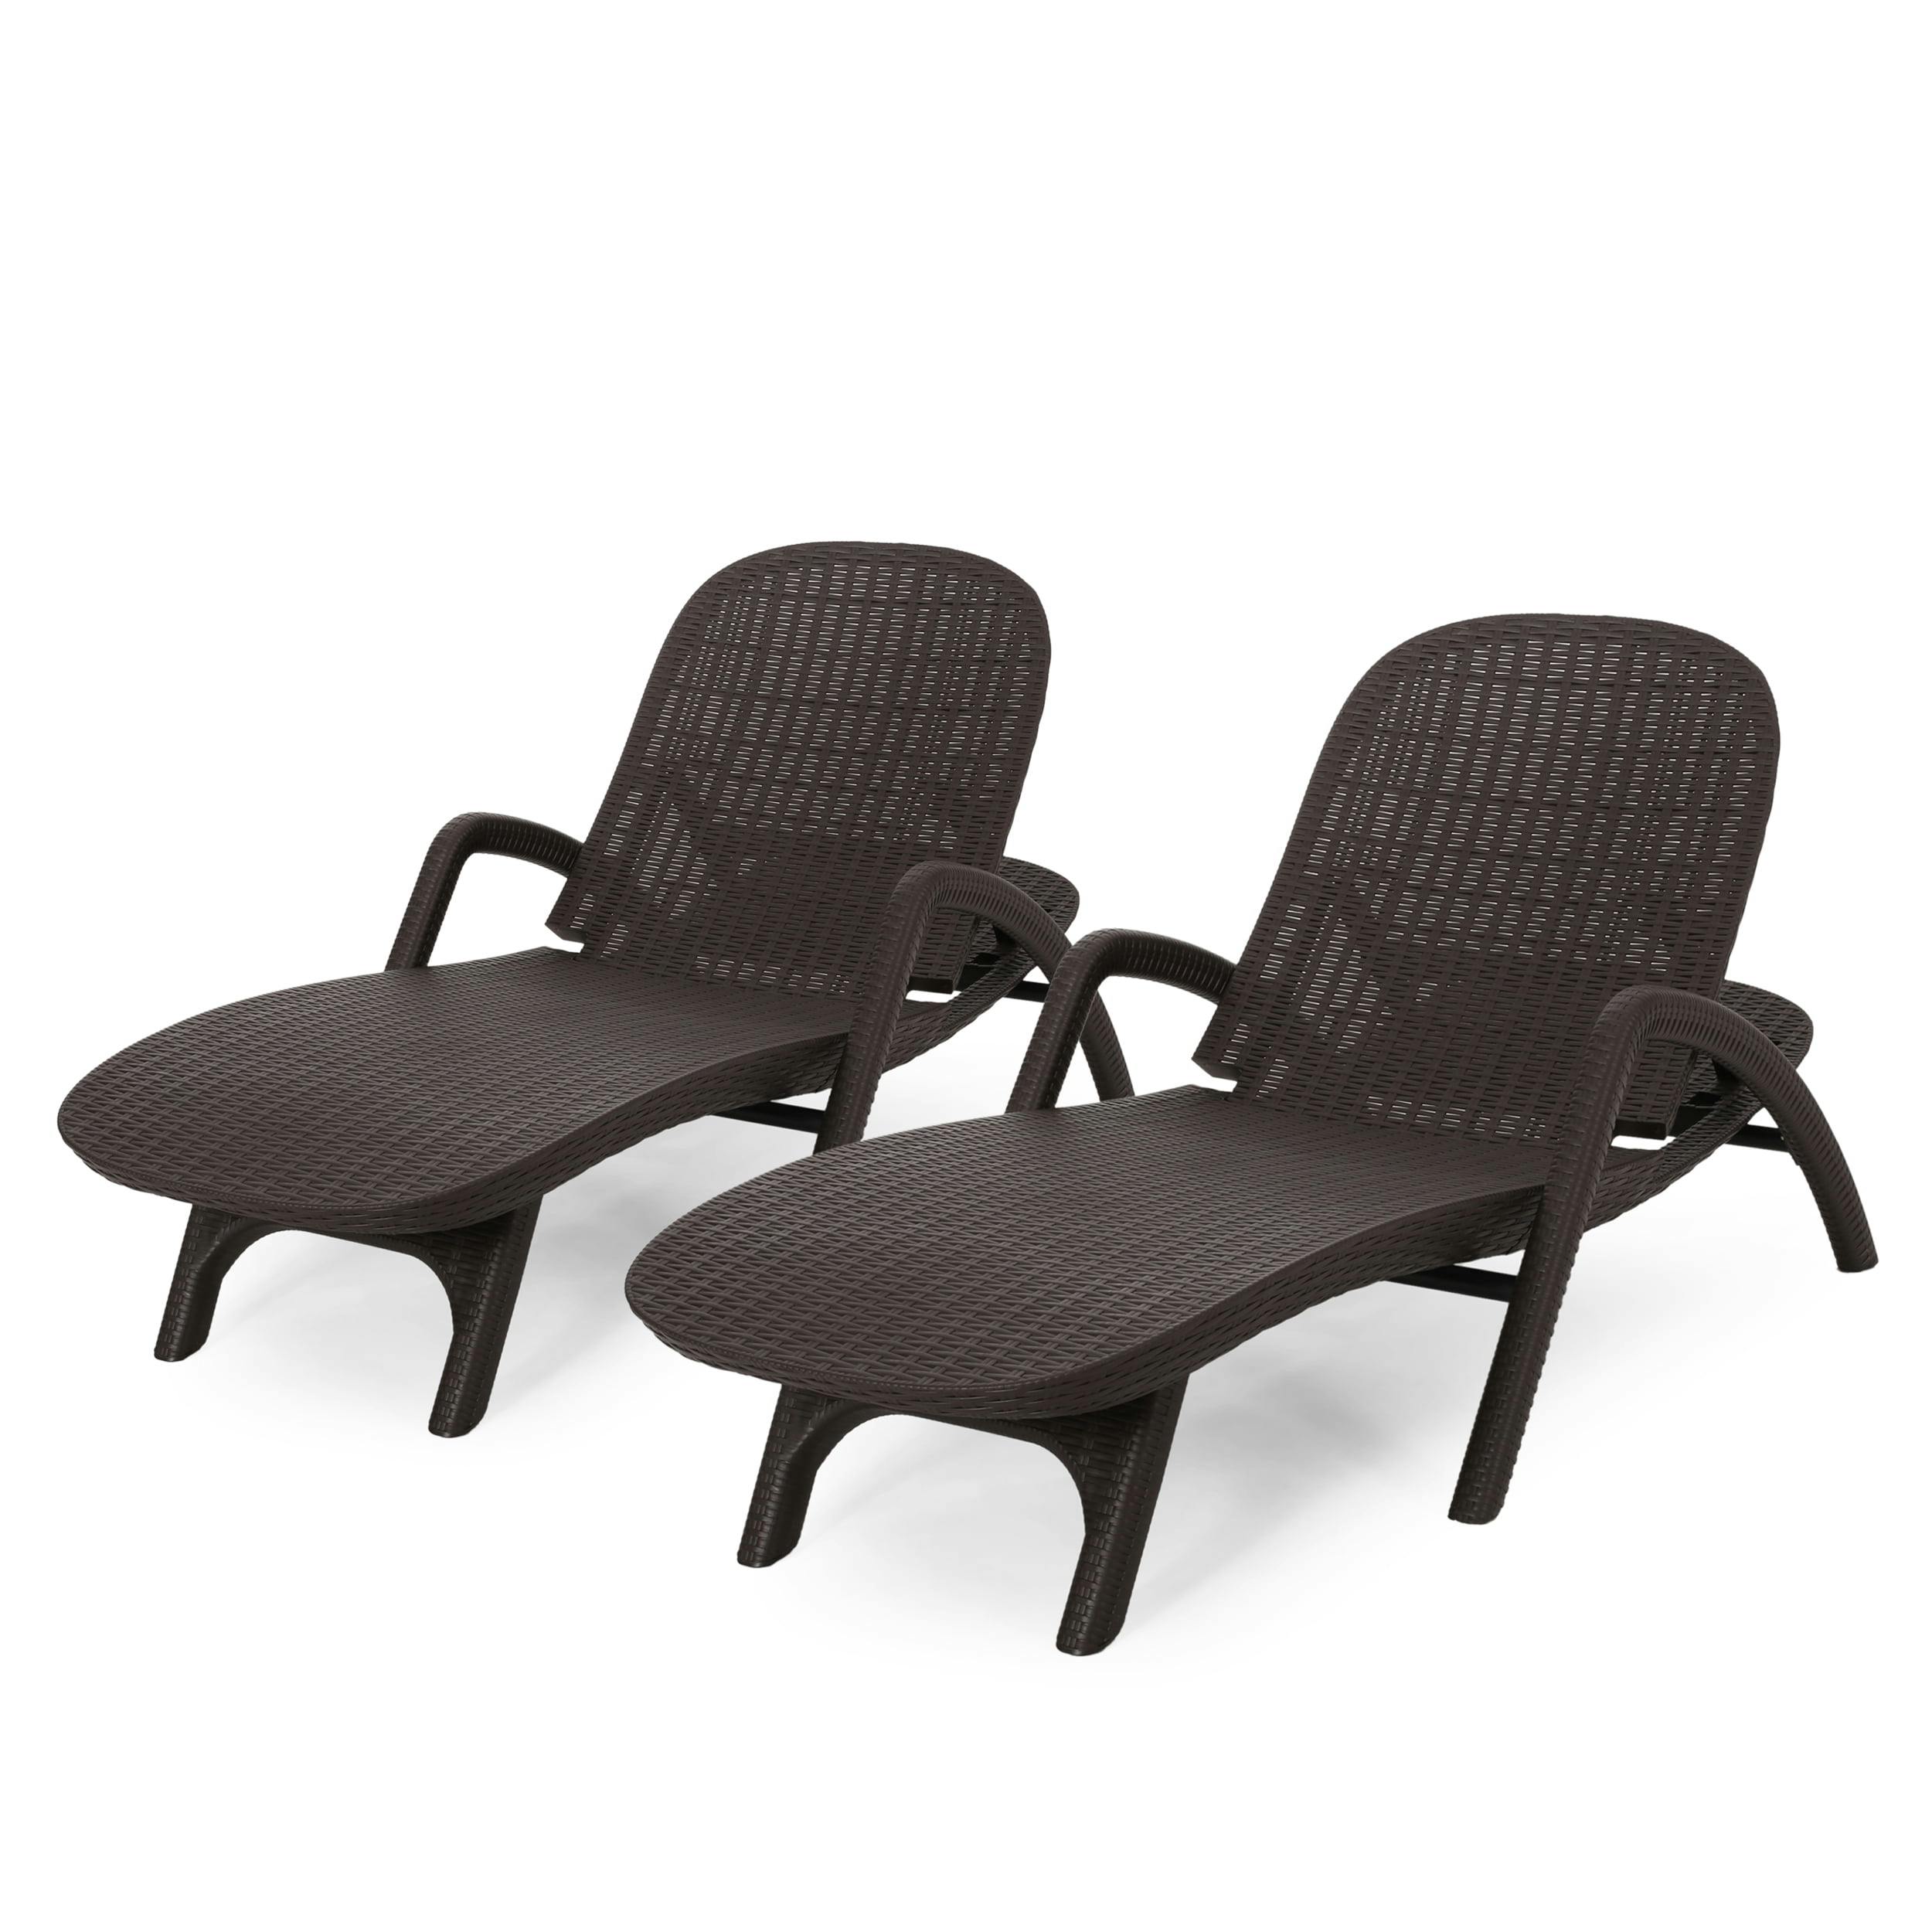 Resilient Outdoor Faux Wicker Lounger Set in Dark Brown